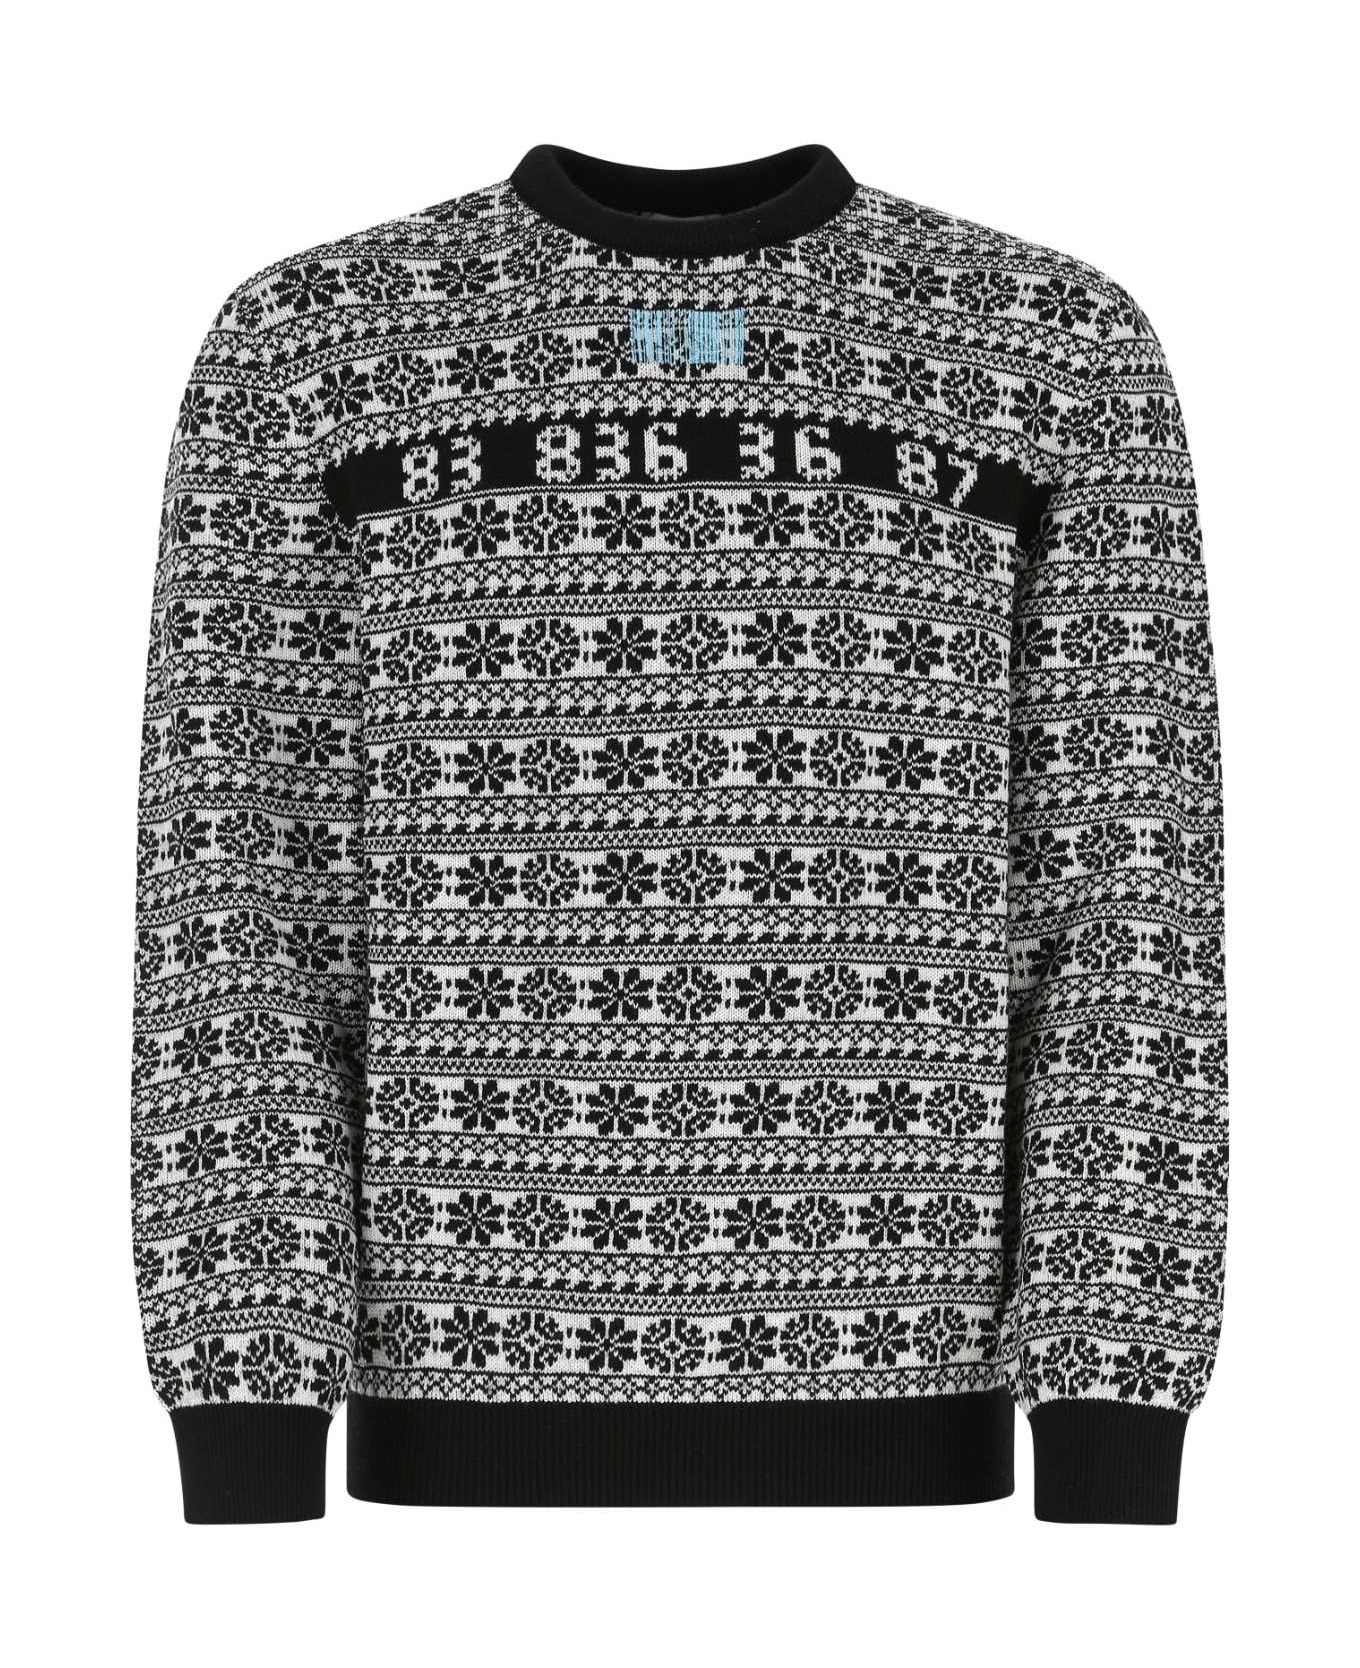 VTMNTS Embroidered Wool Sweater - BLACK